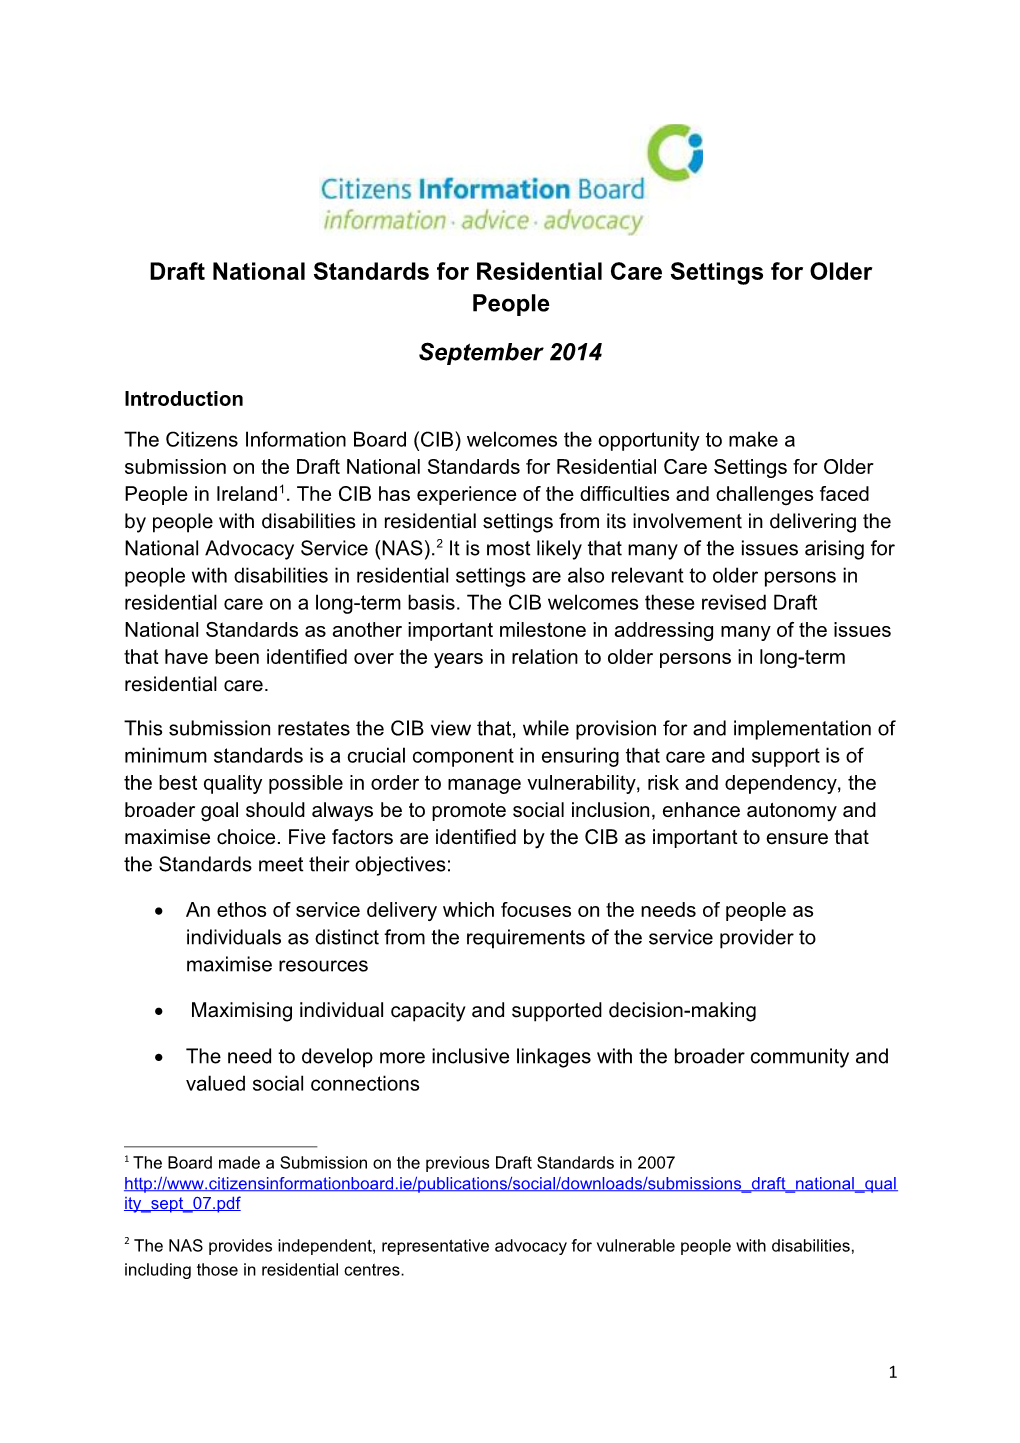 Draft National Standards for Residential Care Settings for Older People